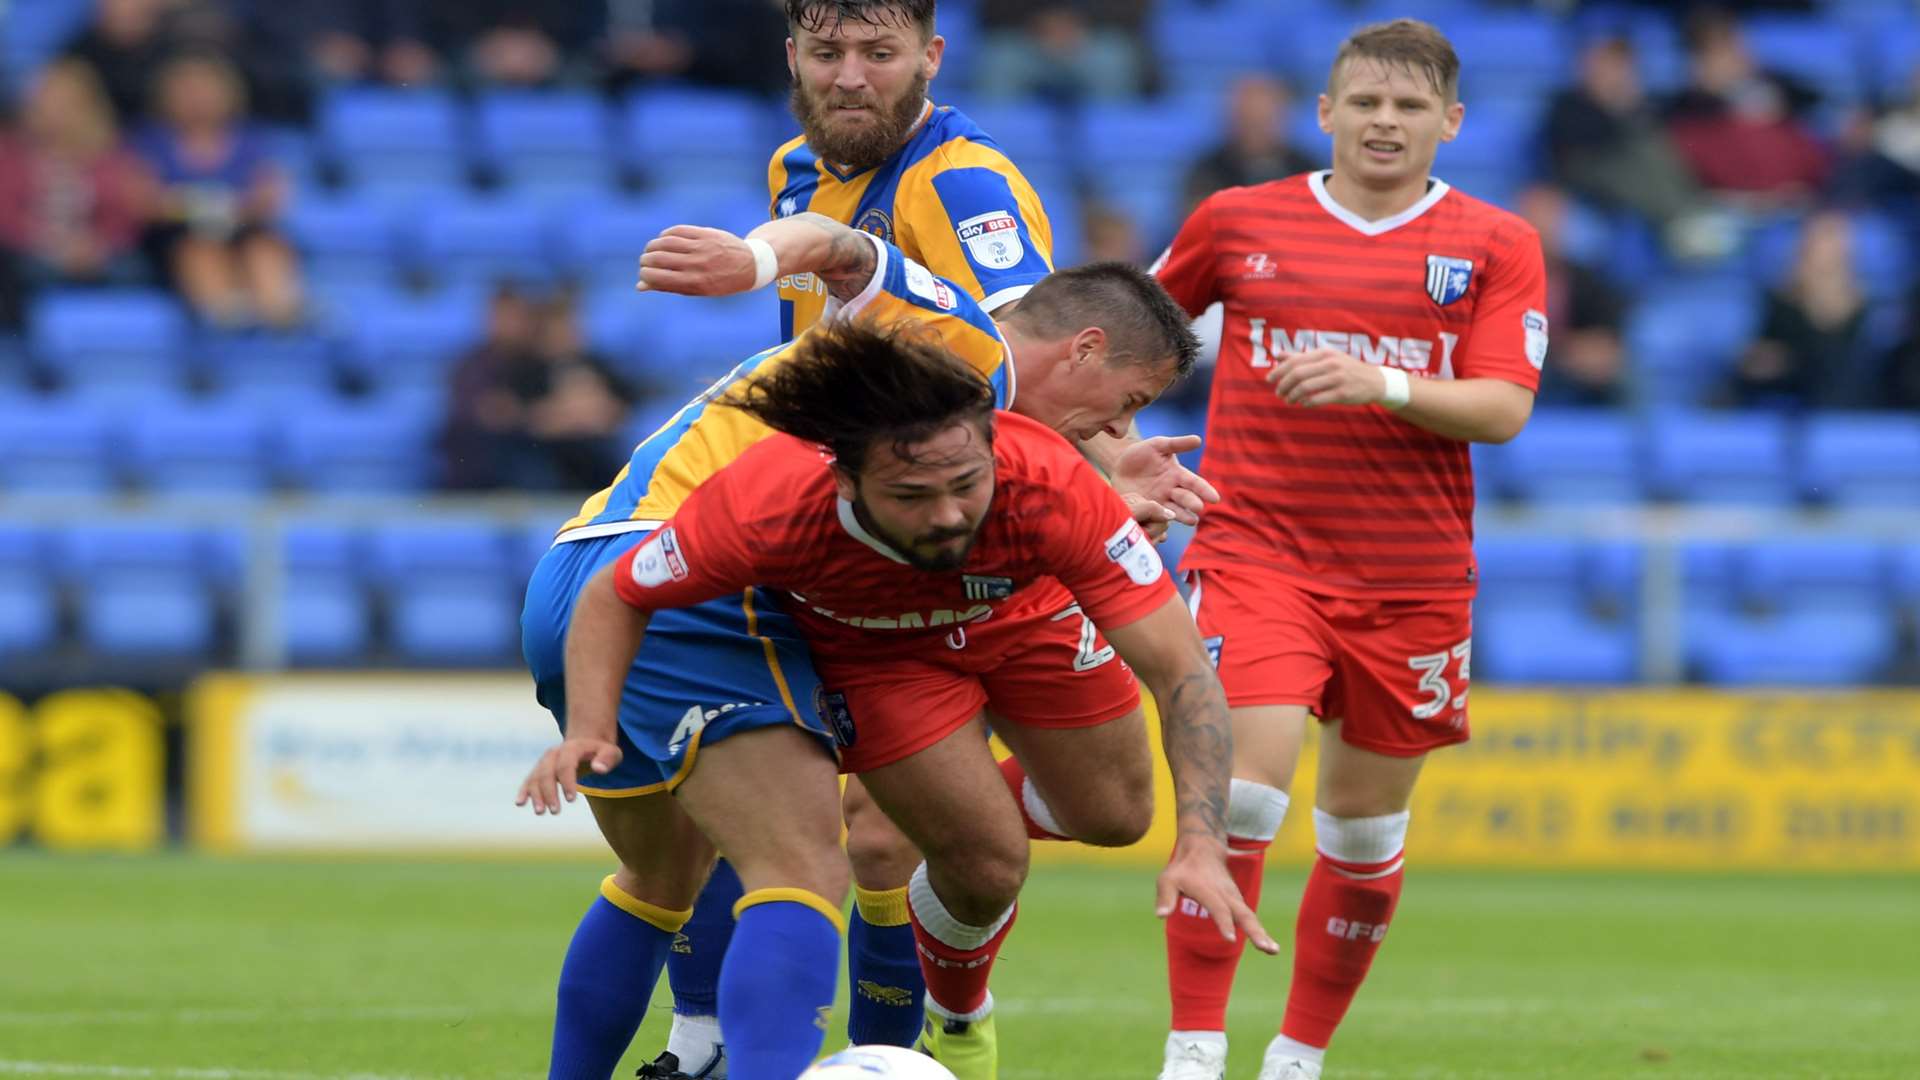 Bradley Dack stopped by foul means Picture: Barry Goodwin